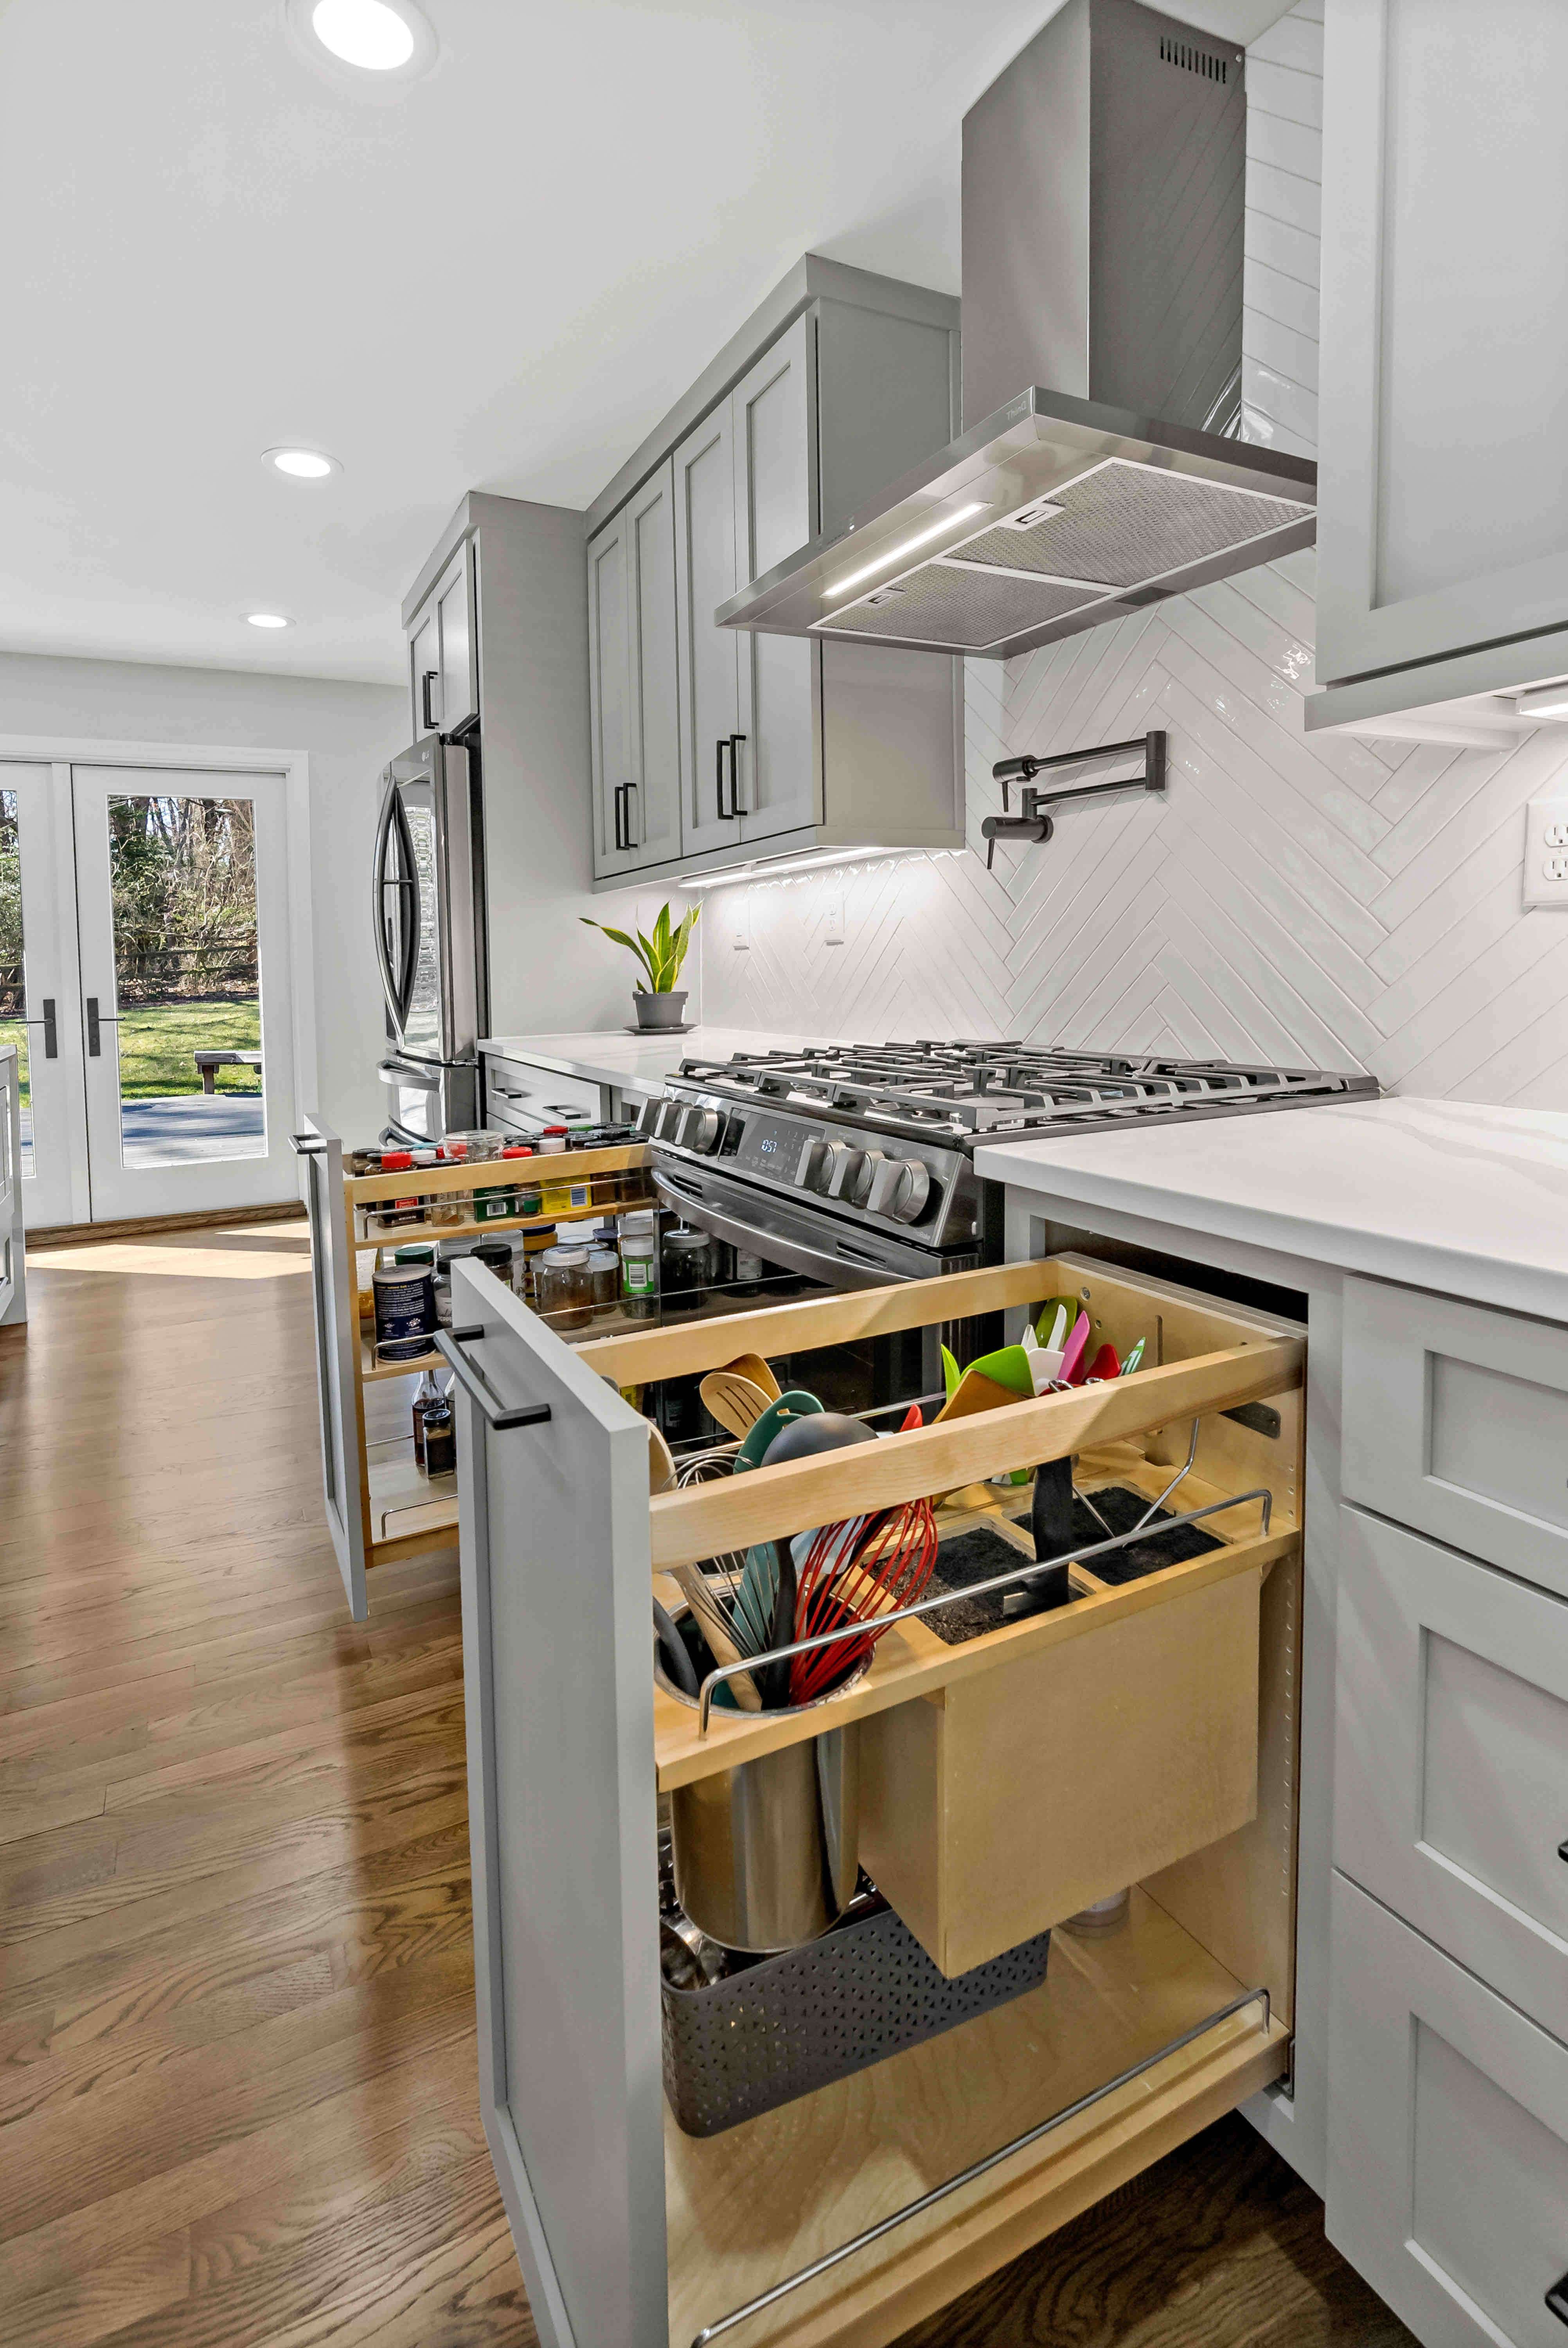 Custom cabinetry pull-out drawers in kitchen by stove